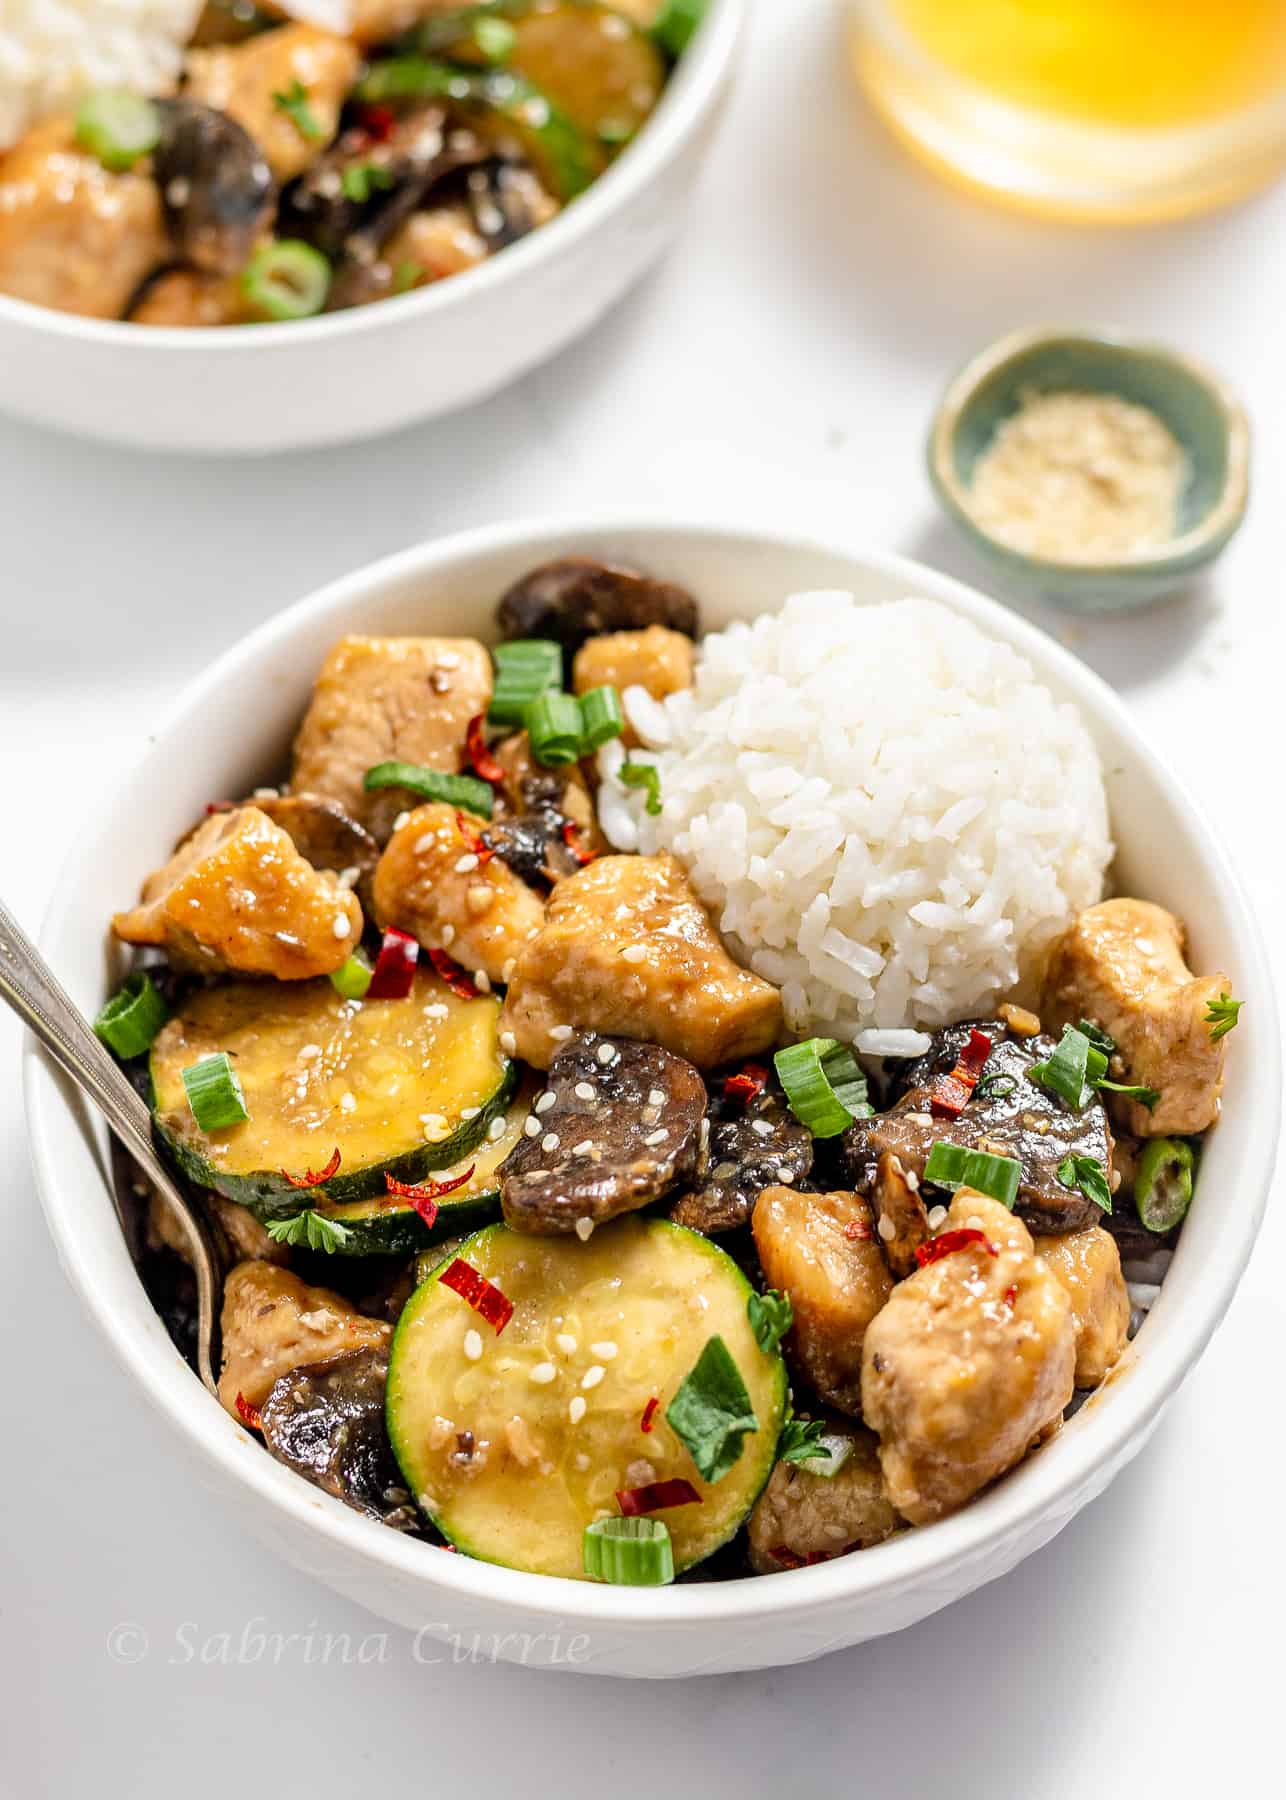 A bowl of chicken stir fry with vegetables and rice.